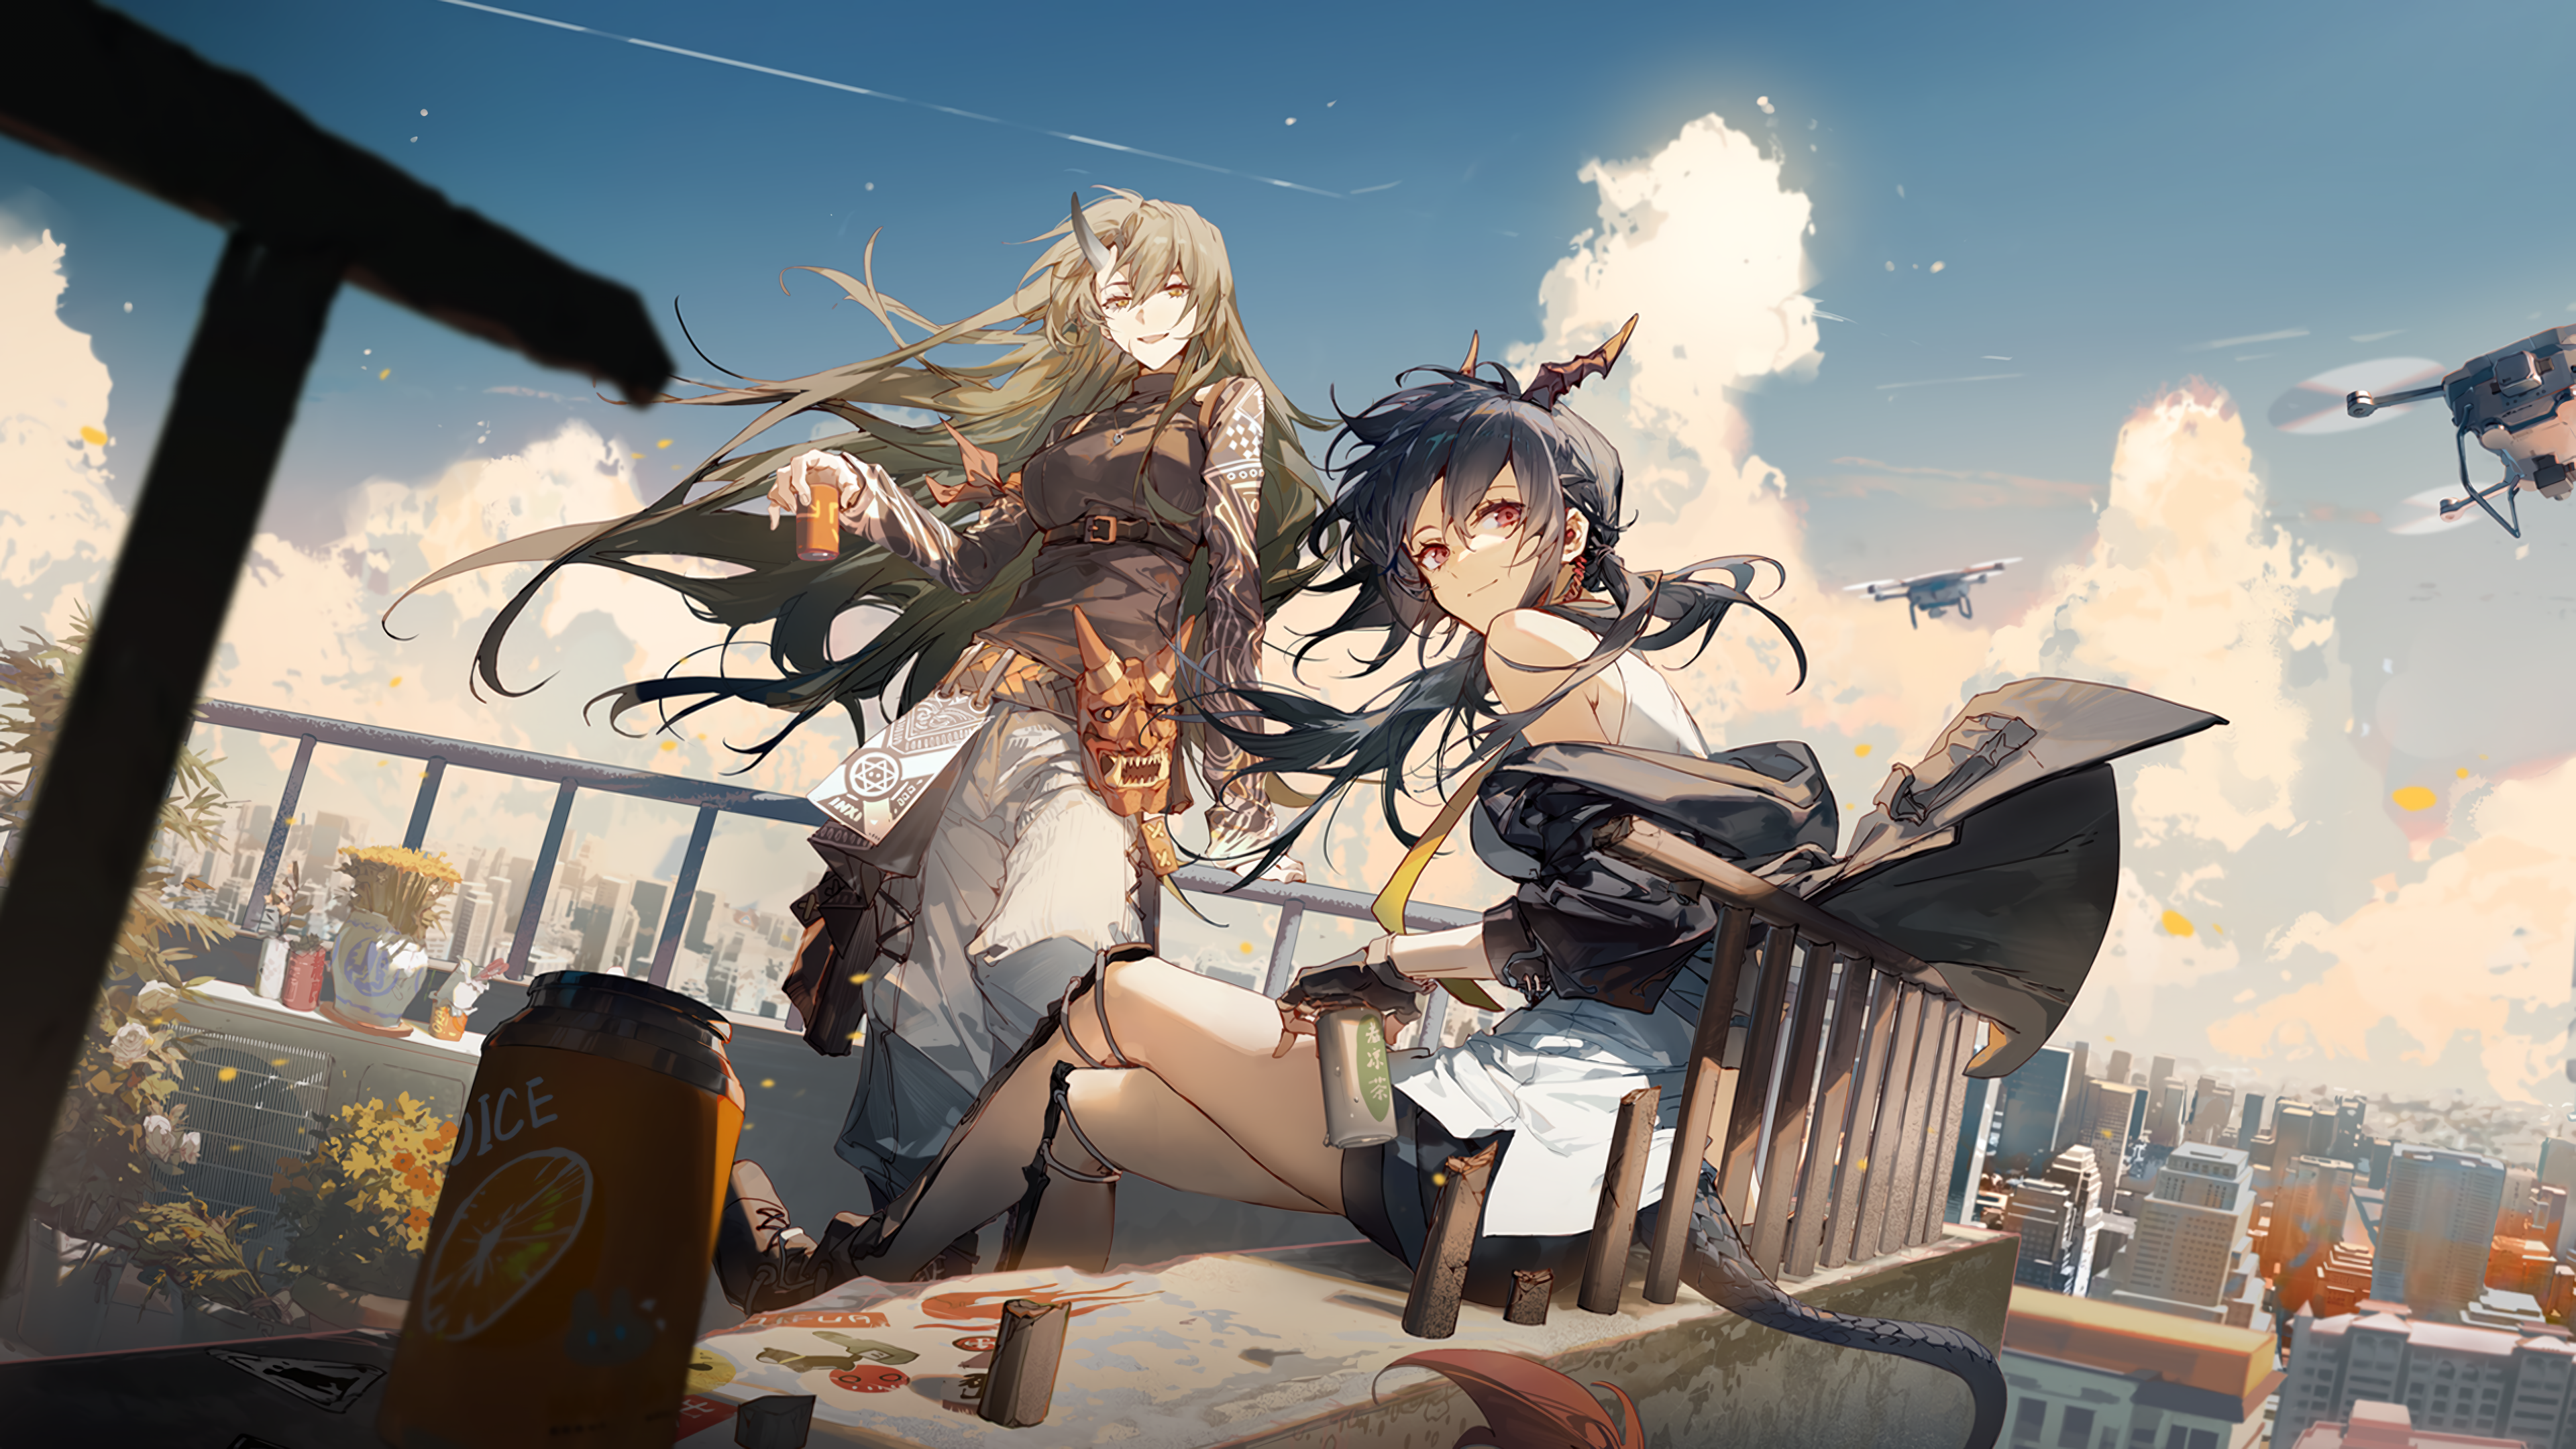 Arknights Hoshiguma Arknights Chen Arknights Sky Anime Girls Clouds Smiling Long Hair Hair Blowing I 3840x2160